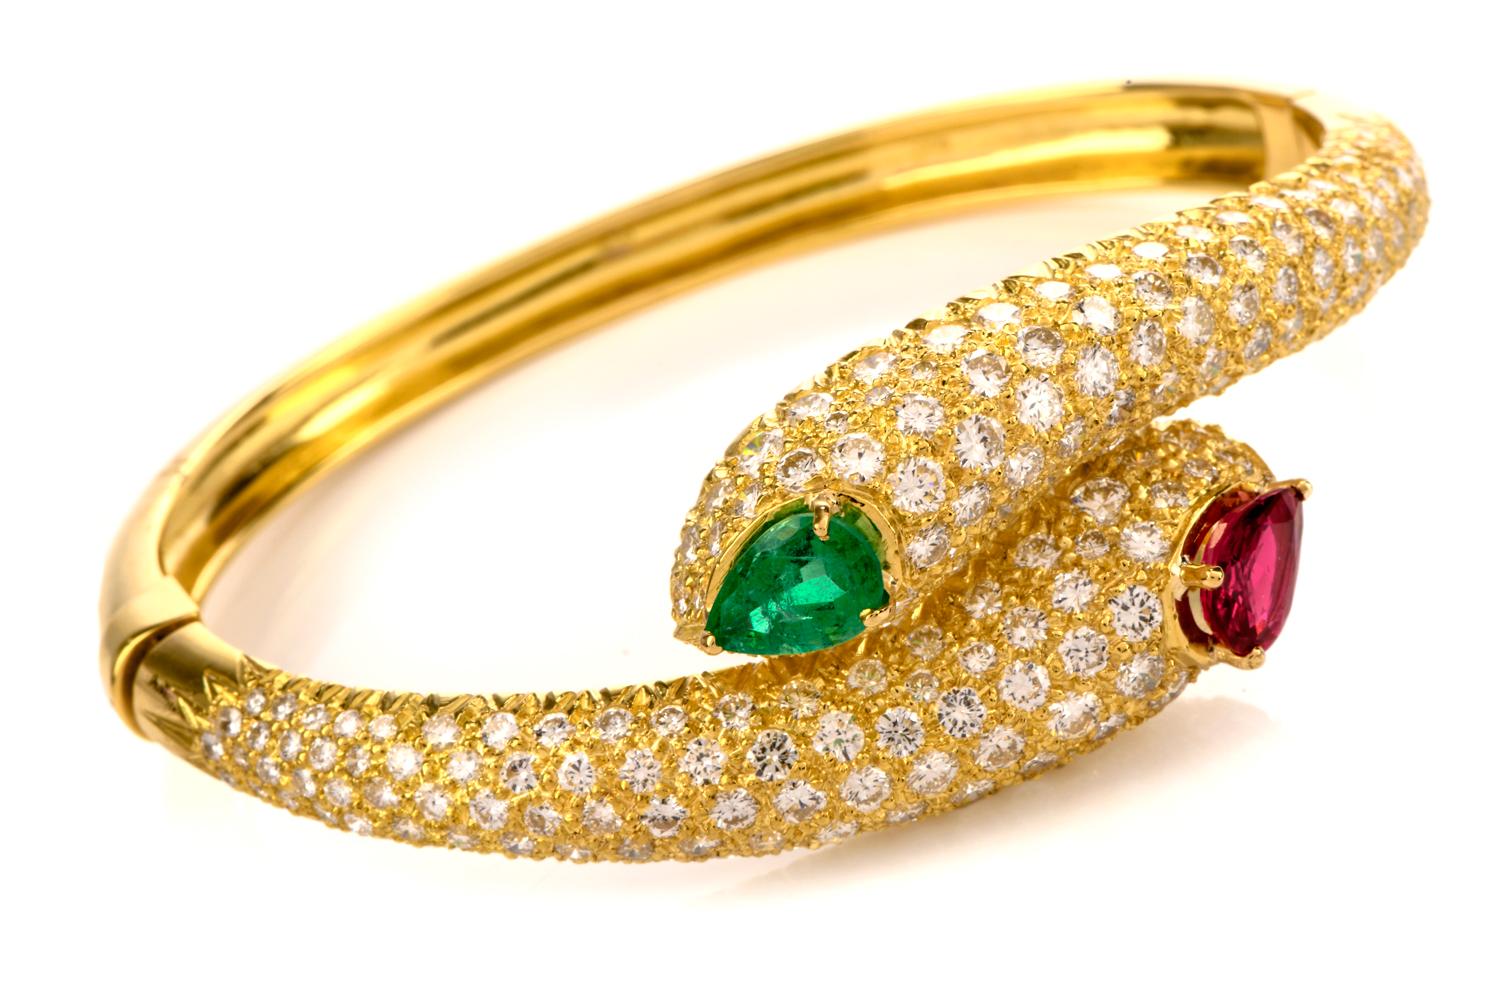 This breathtaking estate Diamond, Ruby and Emerald bracelet is inspired by 

a serpent bypass design and crafted in approximately 34.7 grams of

18k gold.  It contains a hidden locking clasp for continuity.

Some 180 Round Diamonds weigh